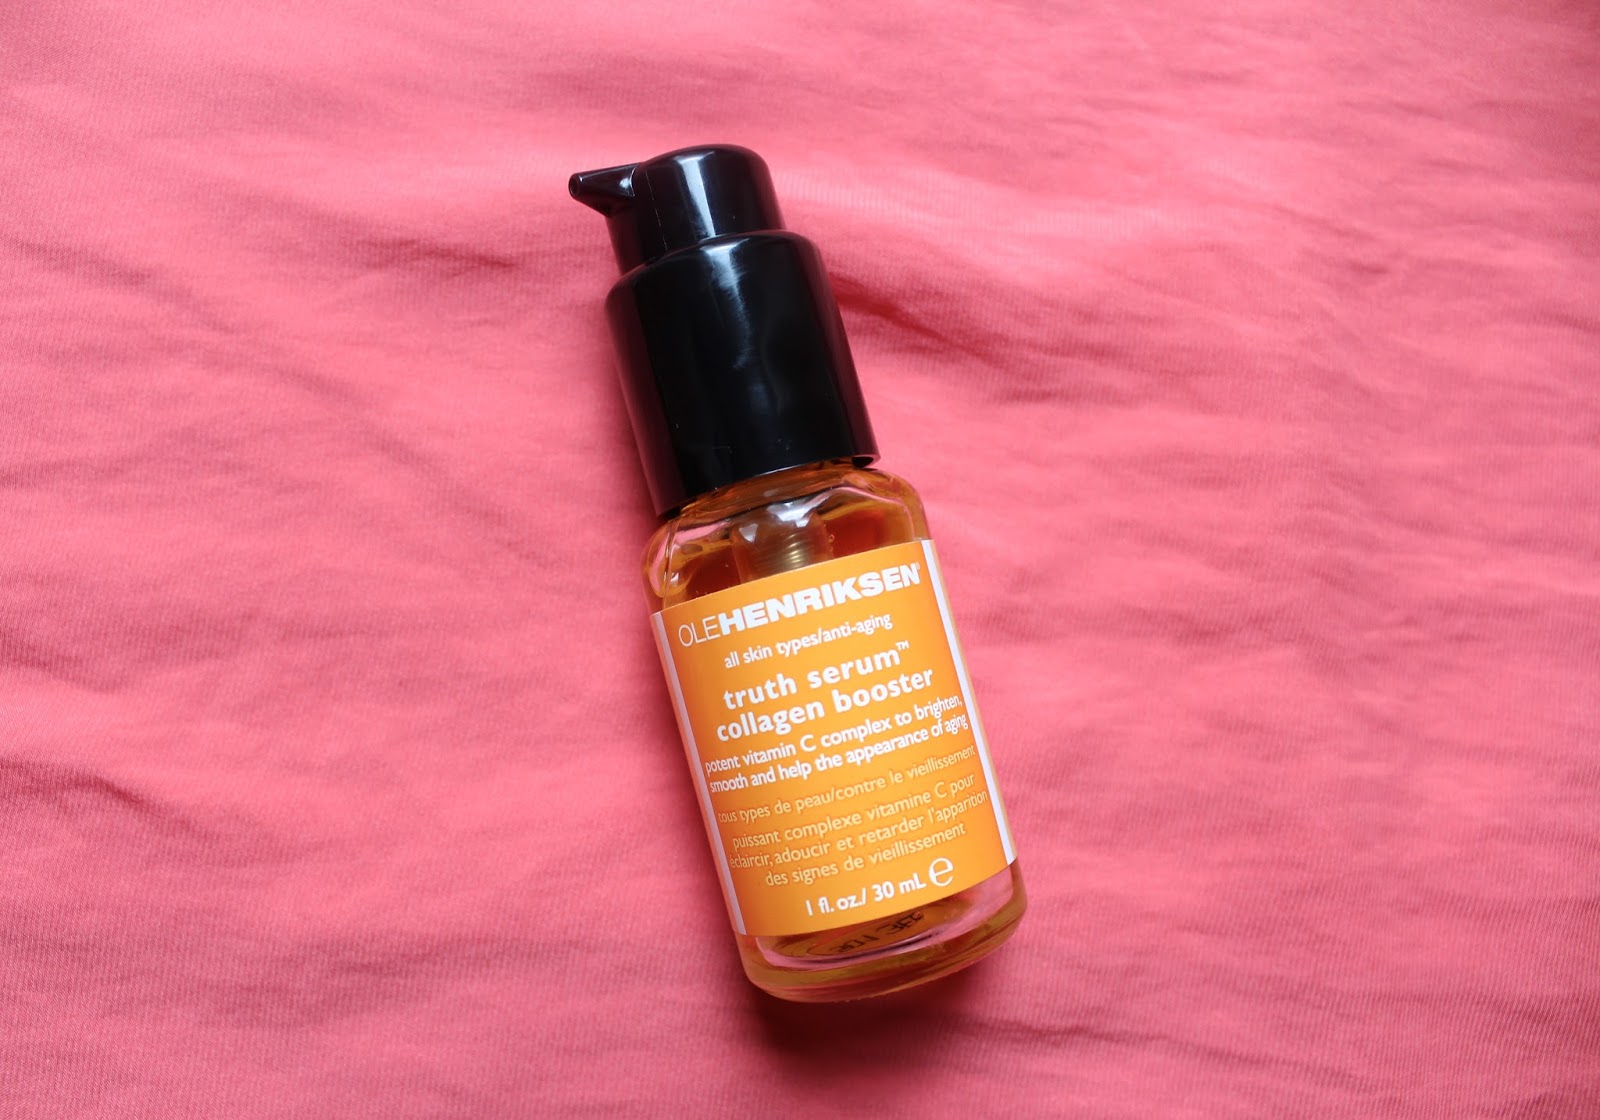 skin skincare beauty serum ole henriksen truth serum collagen booster sali hughes recommendation recommended cult beauty routine oily dry antioxidants vitamin c instagram bblogger bblogger beauty blog post blogger